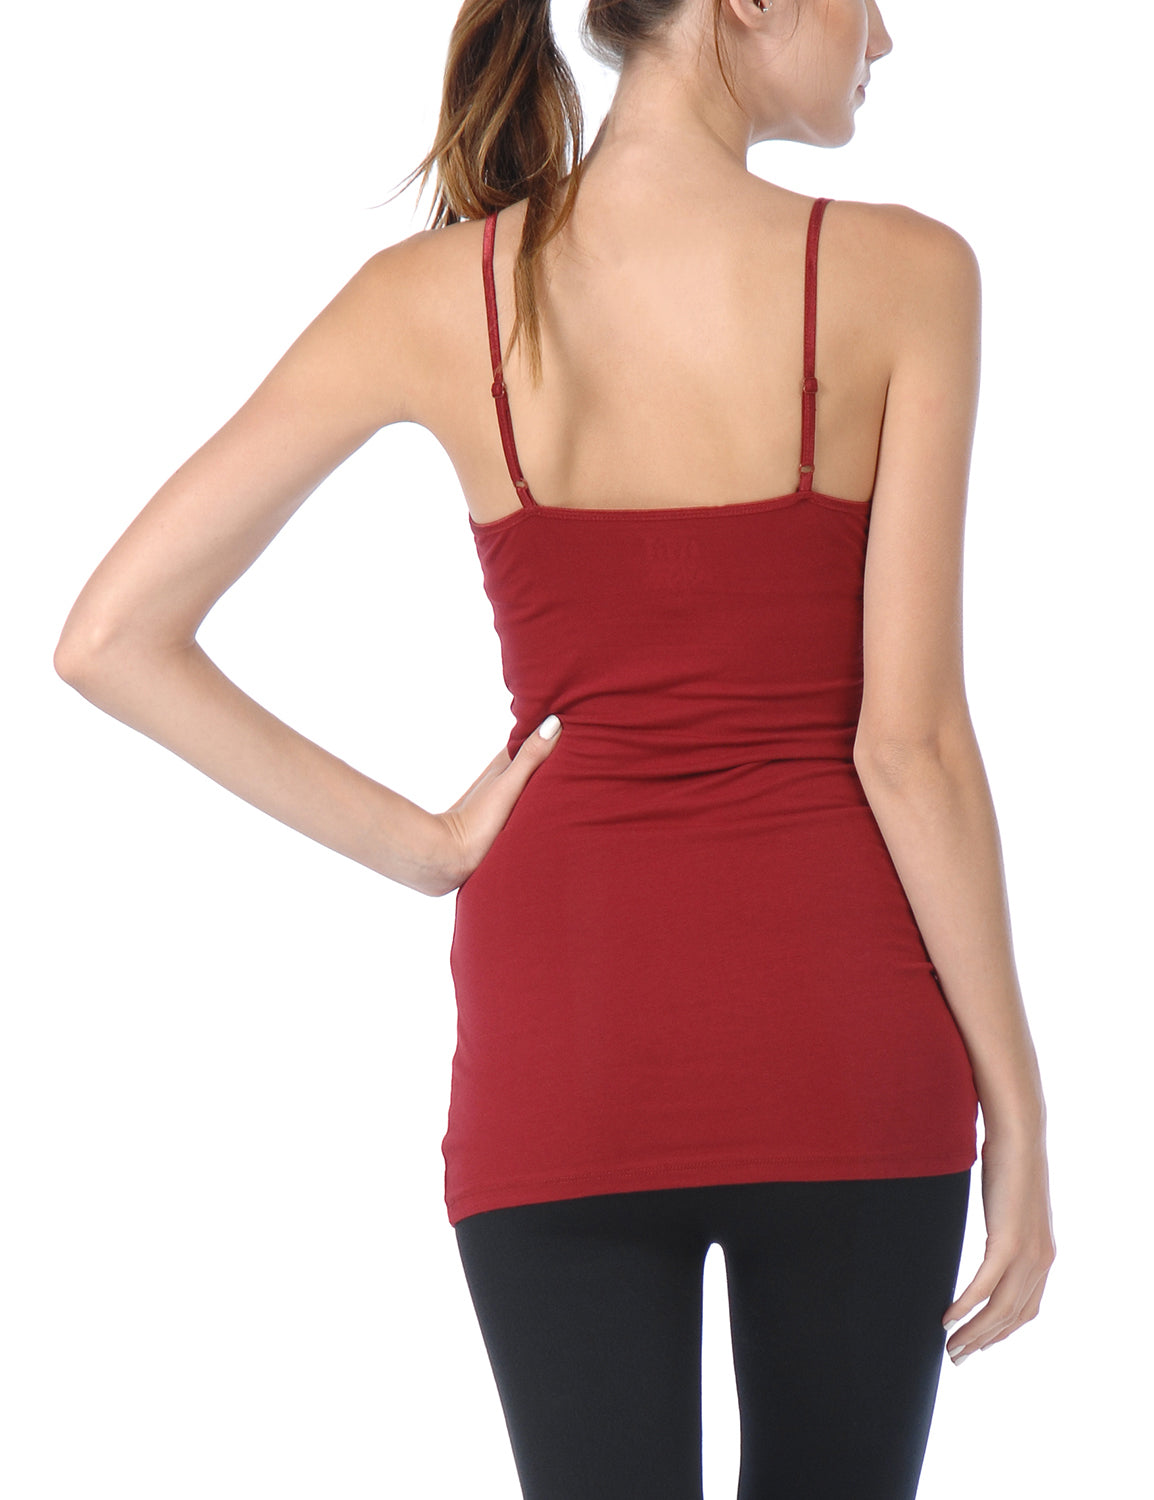 Clearance] Women's Plain Long Cami Tank Top with Adjustable